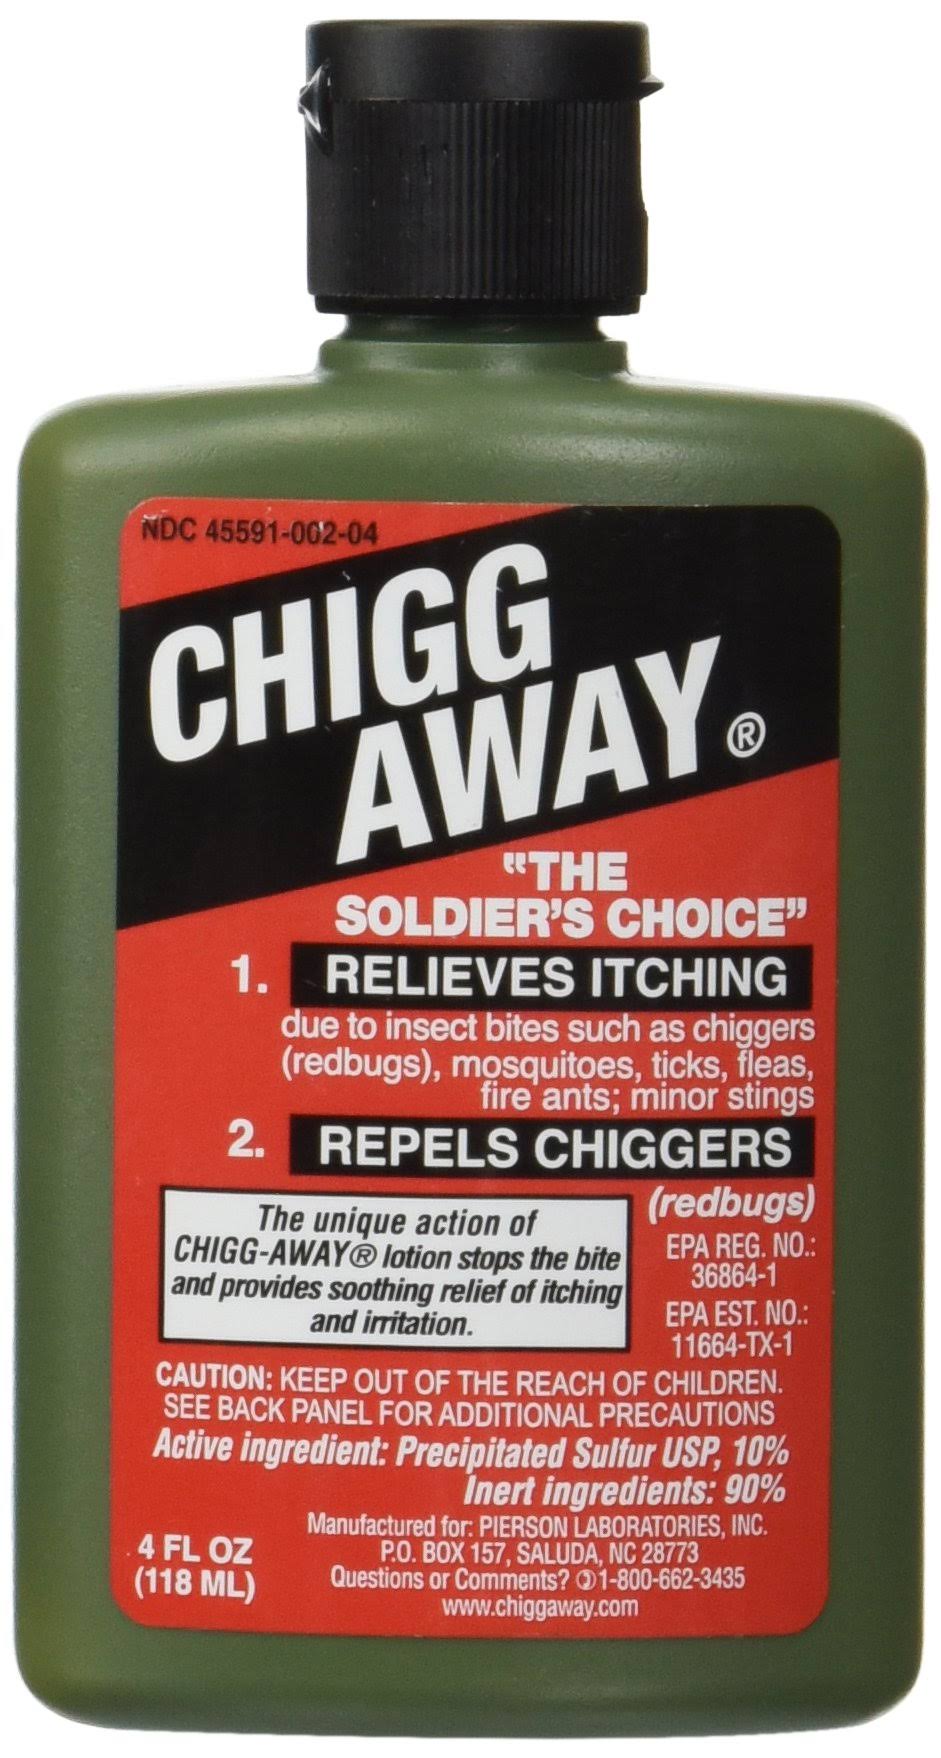 Chigg-Away The Soldier's Choice Relieves Itching and Repels Chiggers - 120ml